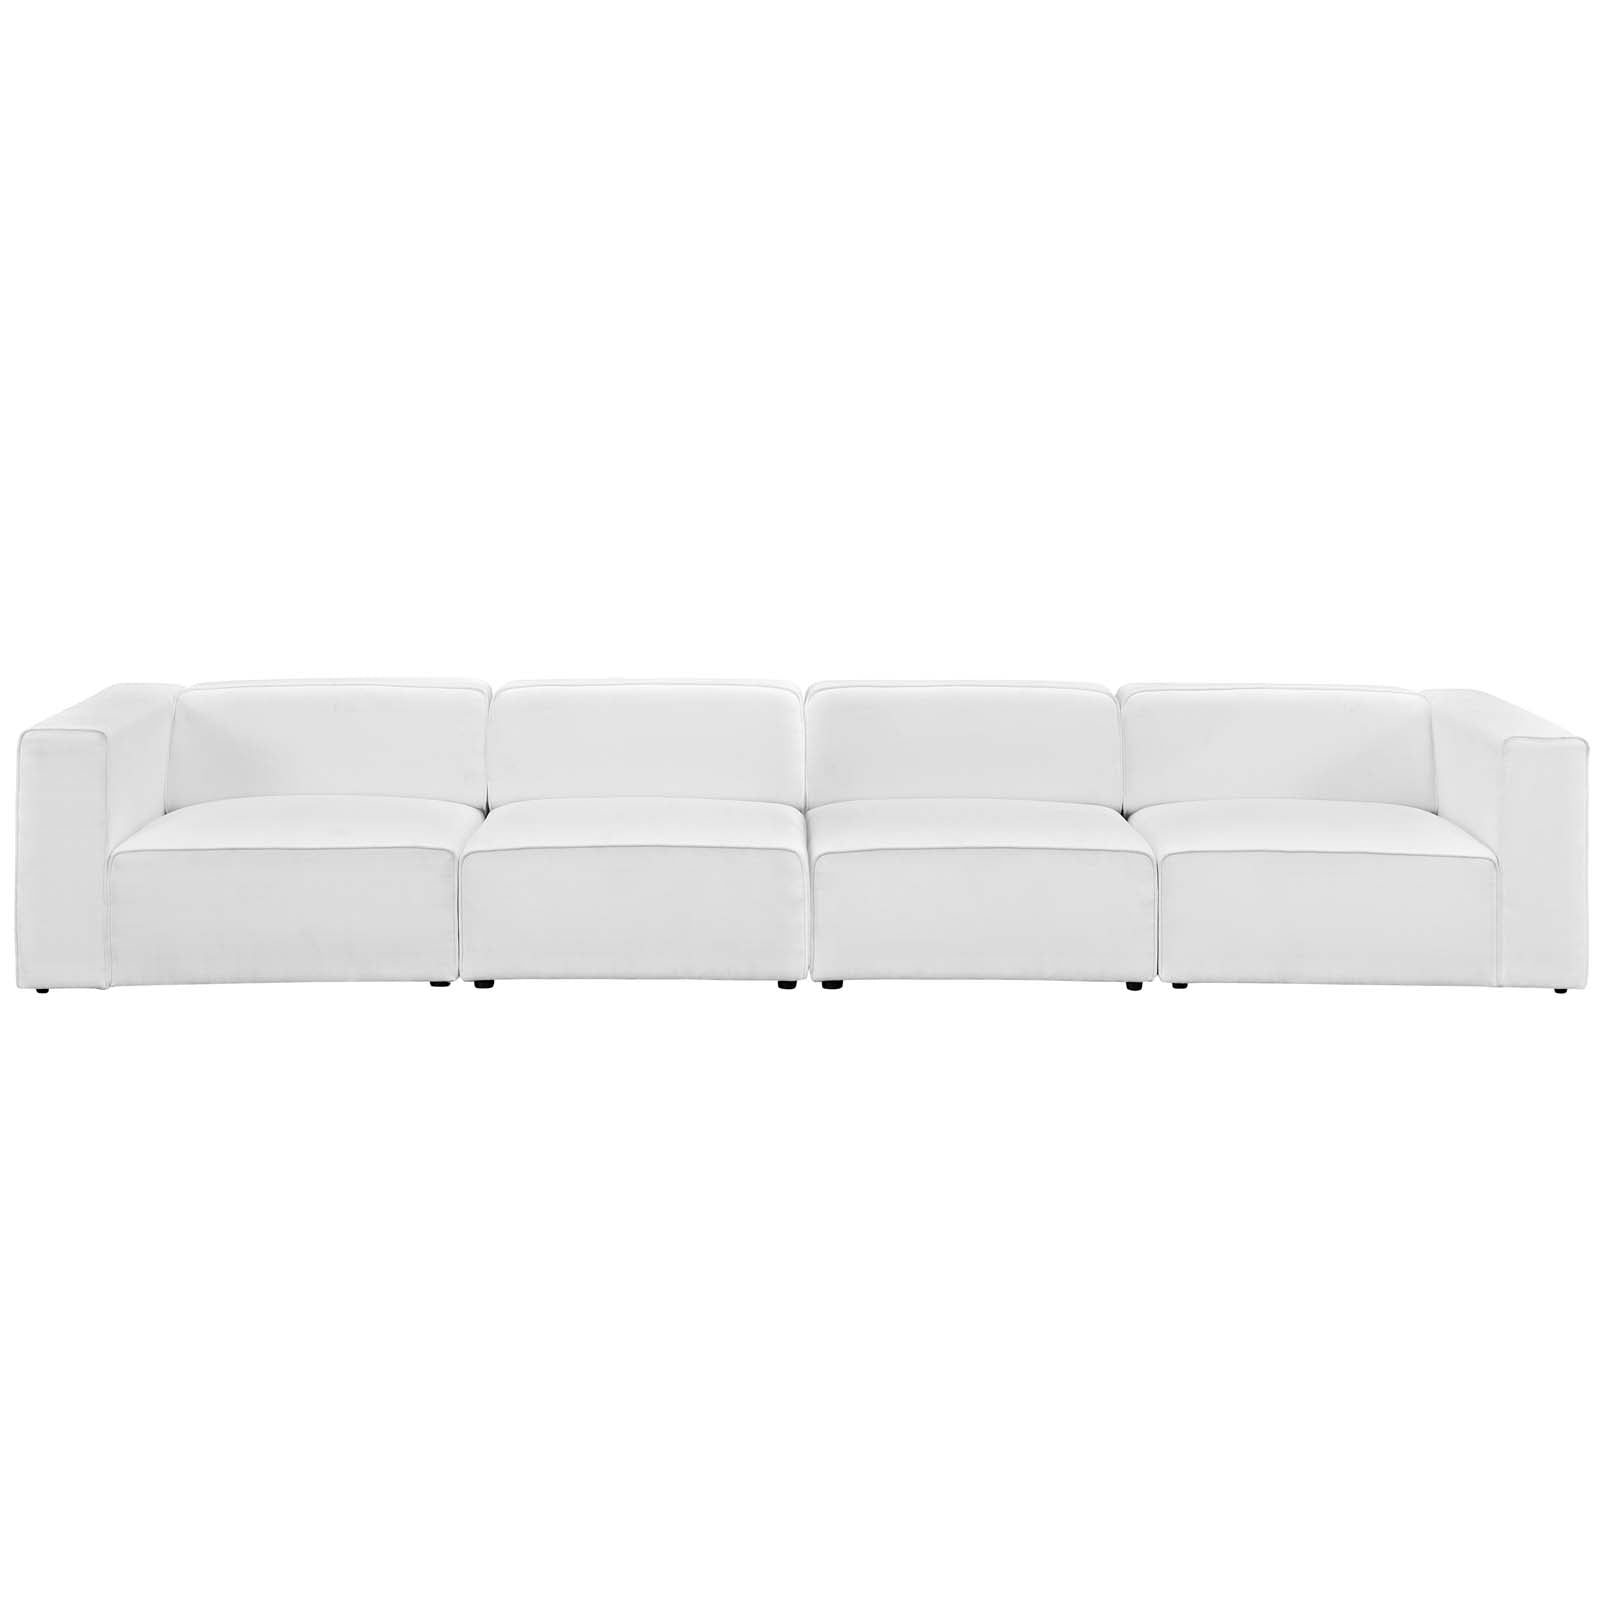 Modway Sofas & Couches - Mingle Upholstered Fabric Sectional Sofa Set White